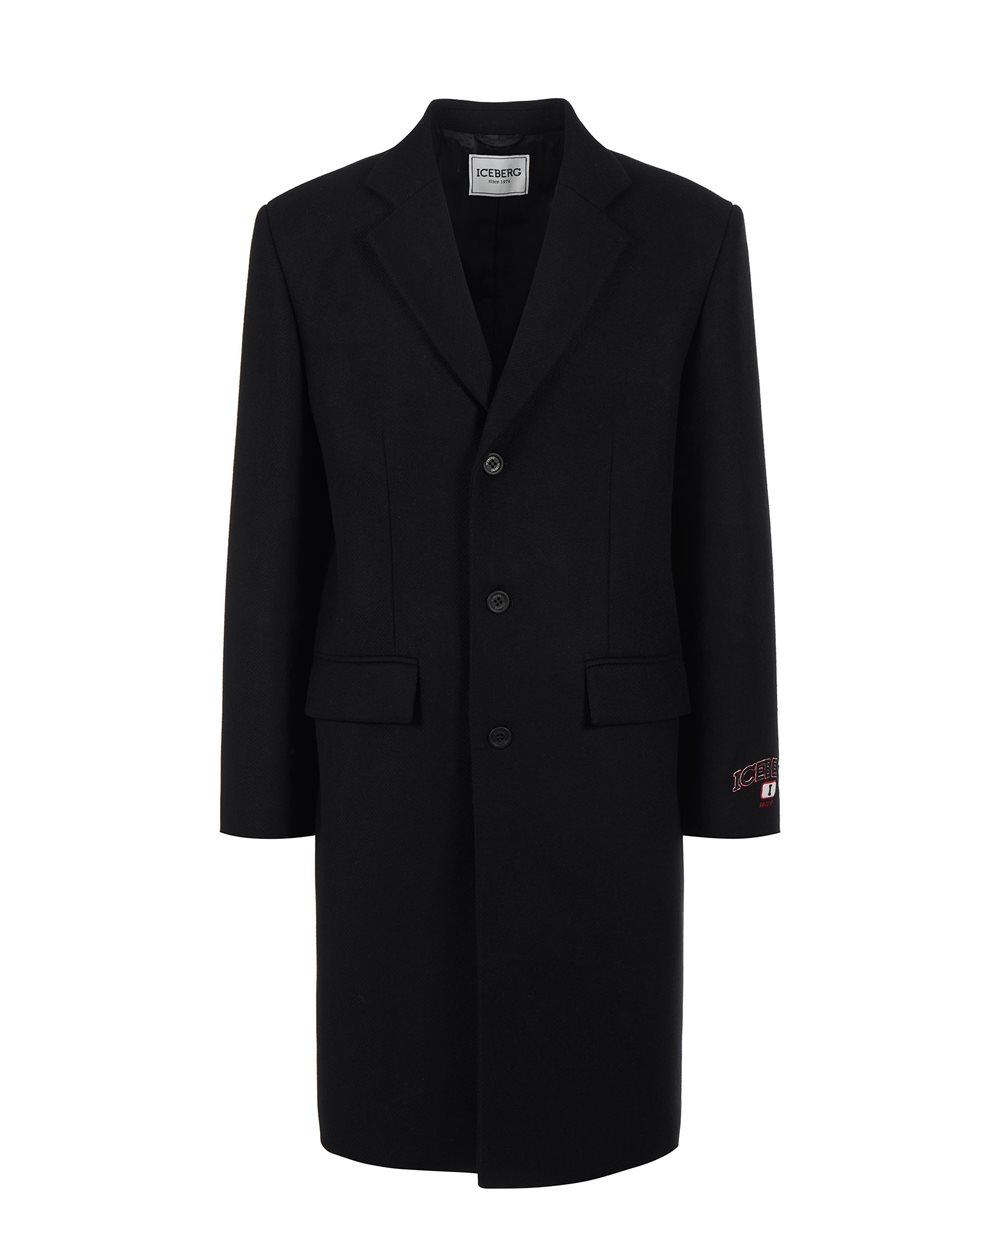 Wool cloth coat with logo - ( SECONDO STEP IT ) PROMO SALDI UP TO 40% | Iceberg - Official Website